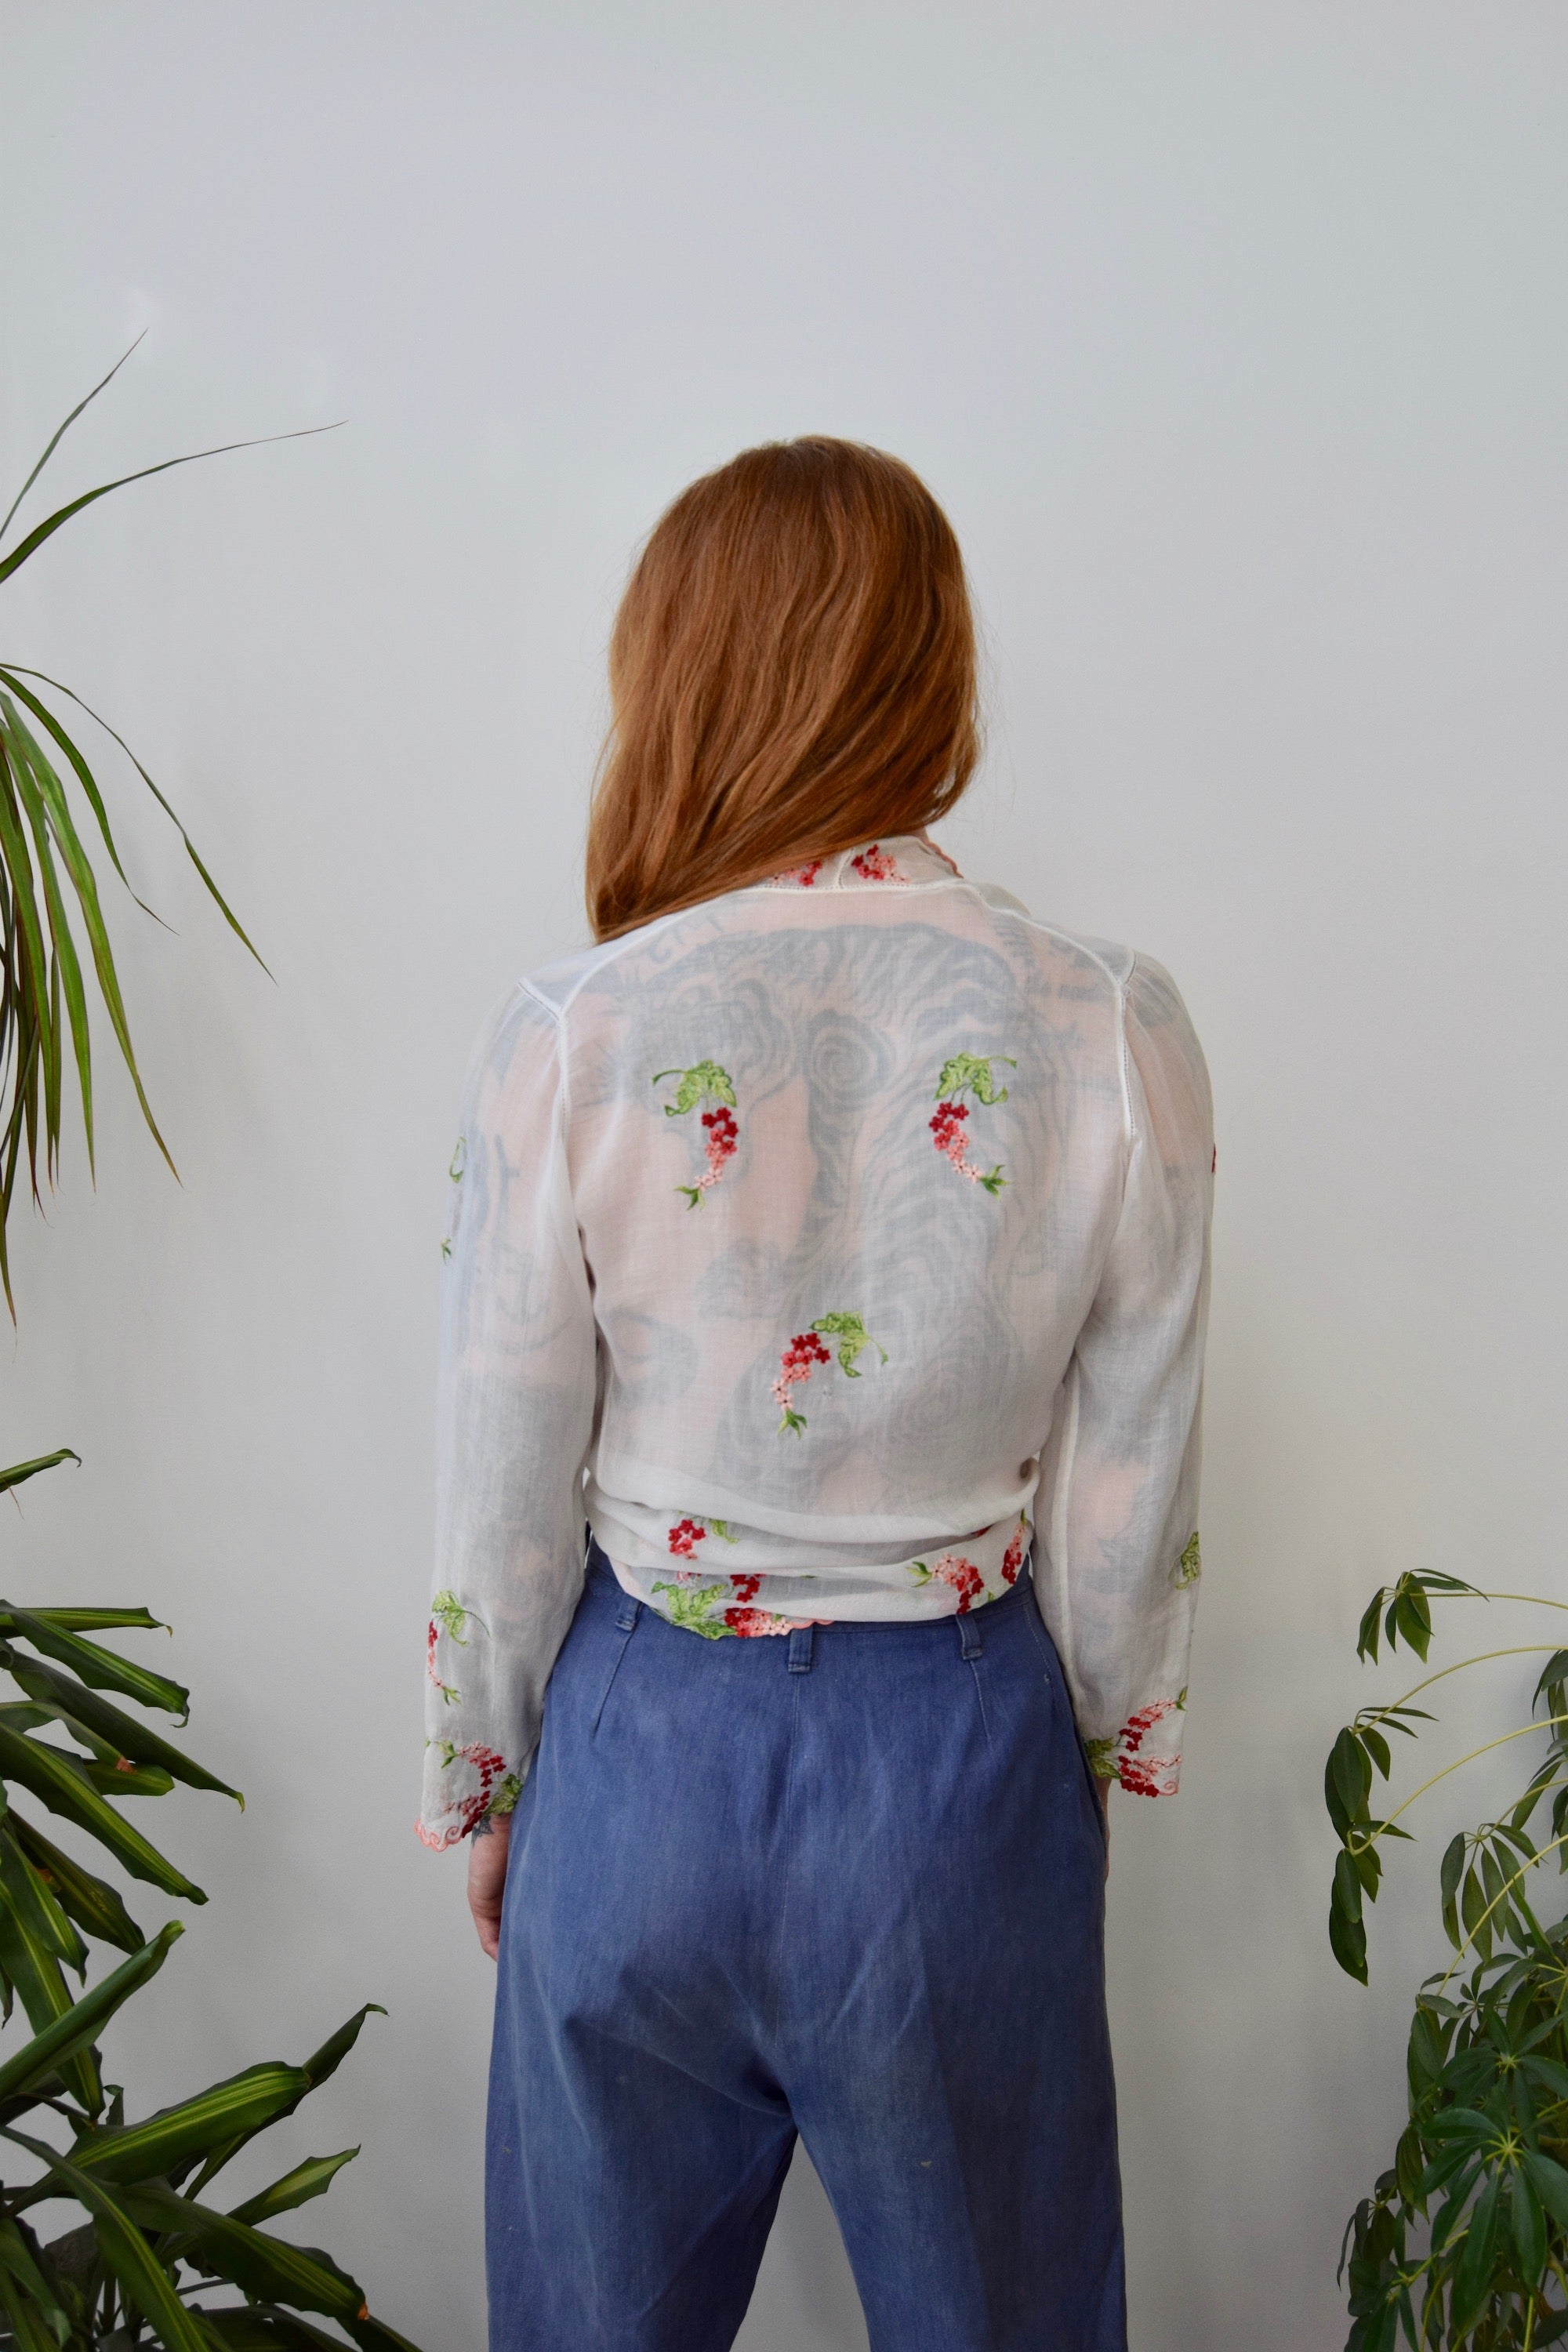 Gauzy Embroidered Blouse